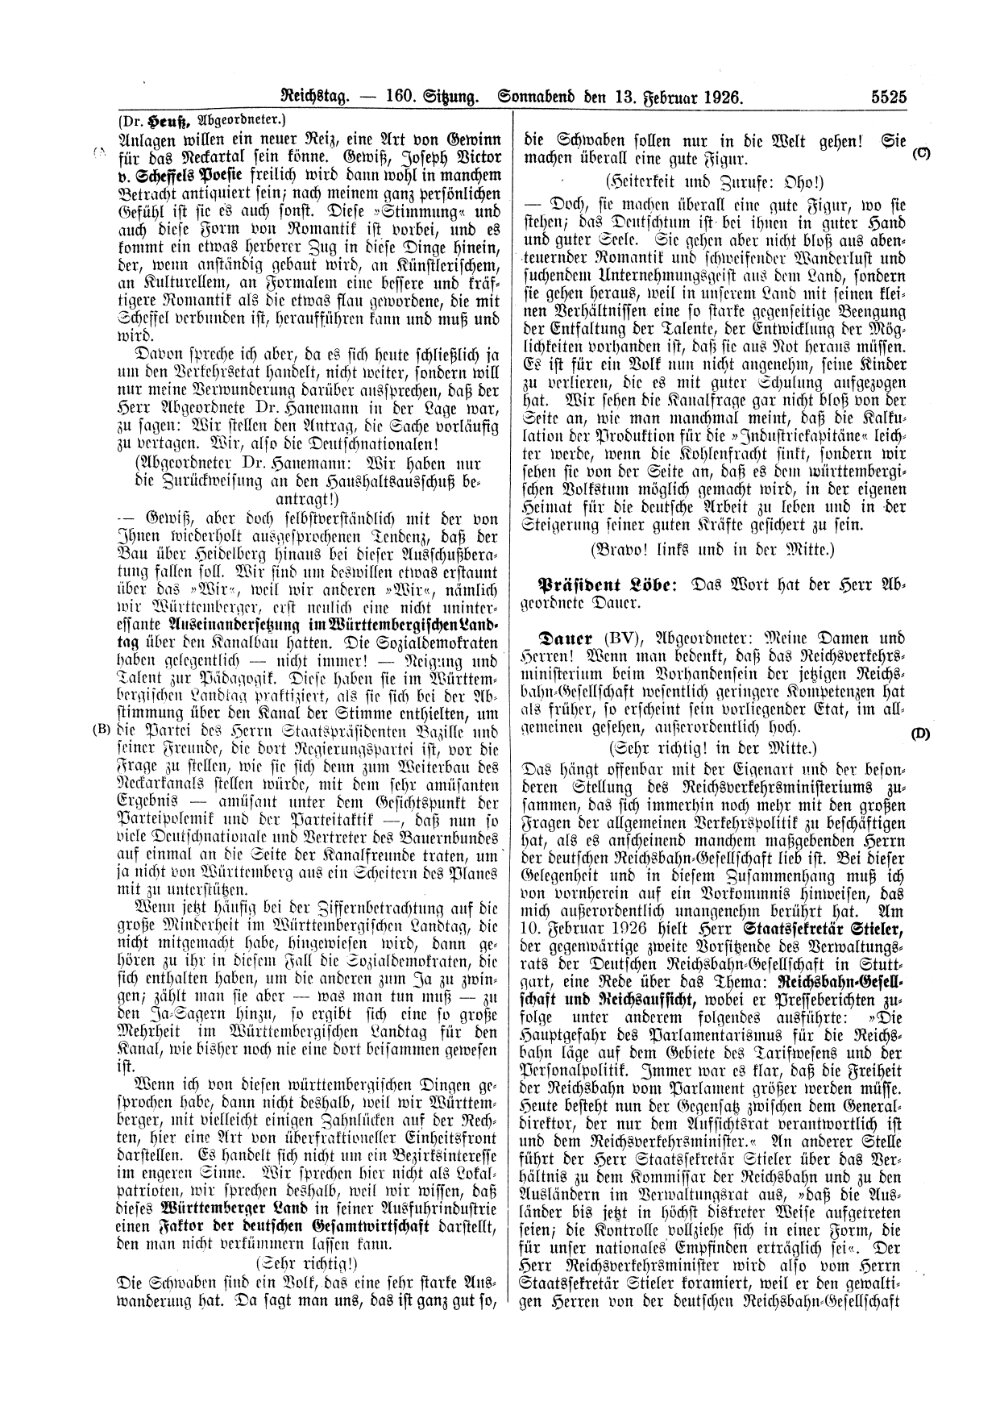 Scan of page 5525